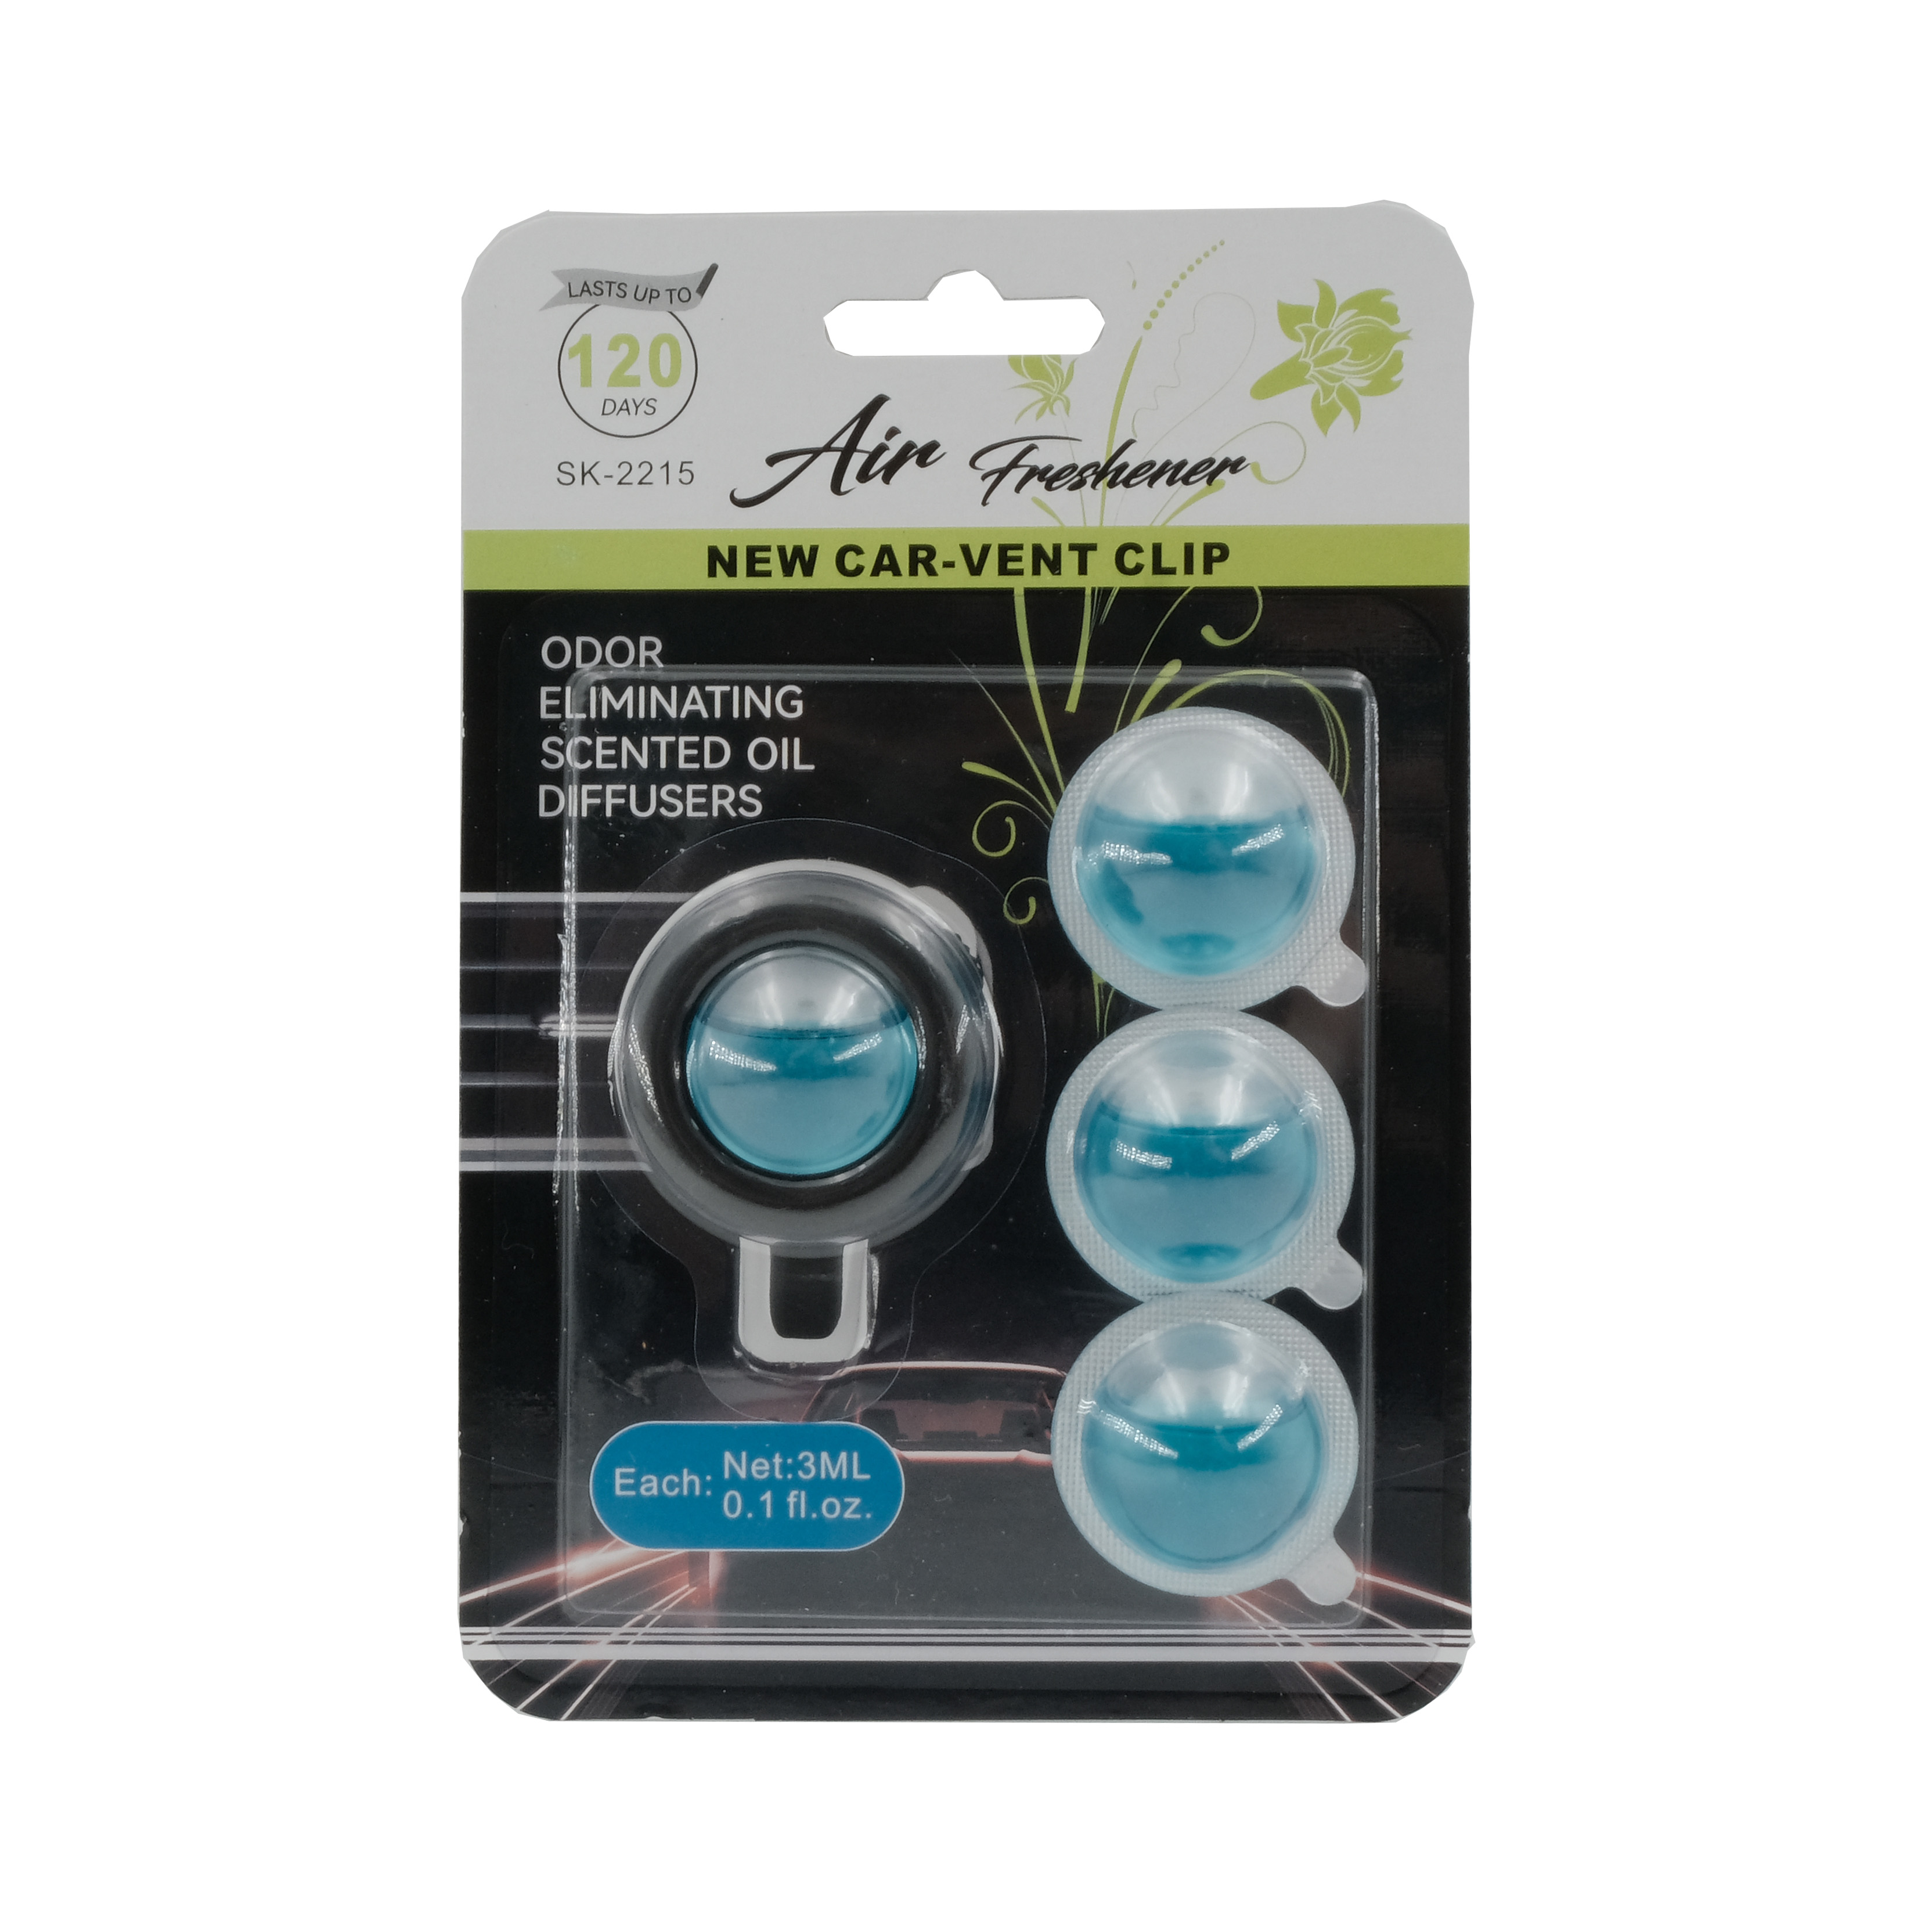 Car Air Freshener Vent Clips, 4 Vent Clips, 3ml Each, Long Lasting Up To 120 Days Car Refresher Odor Eliminator